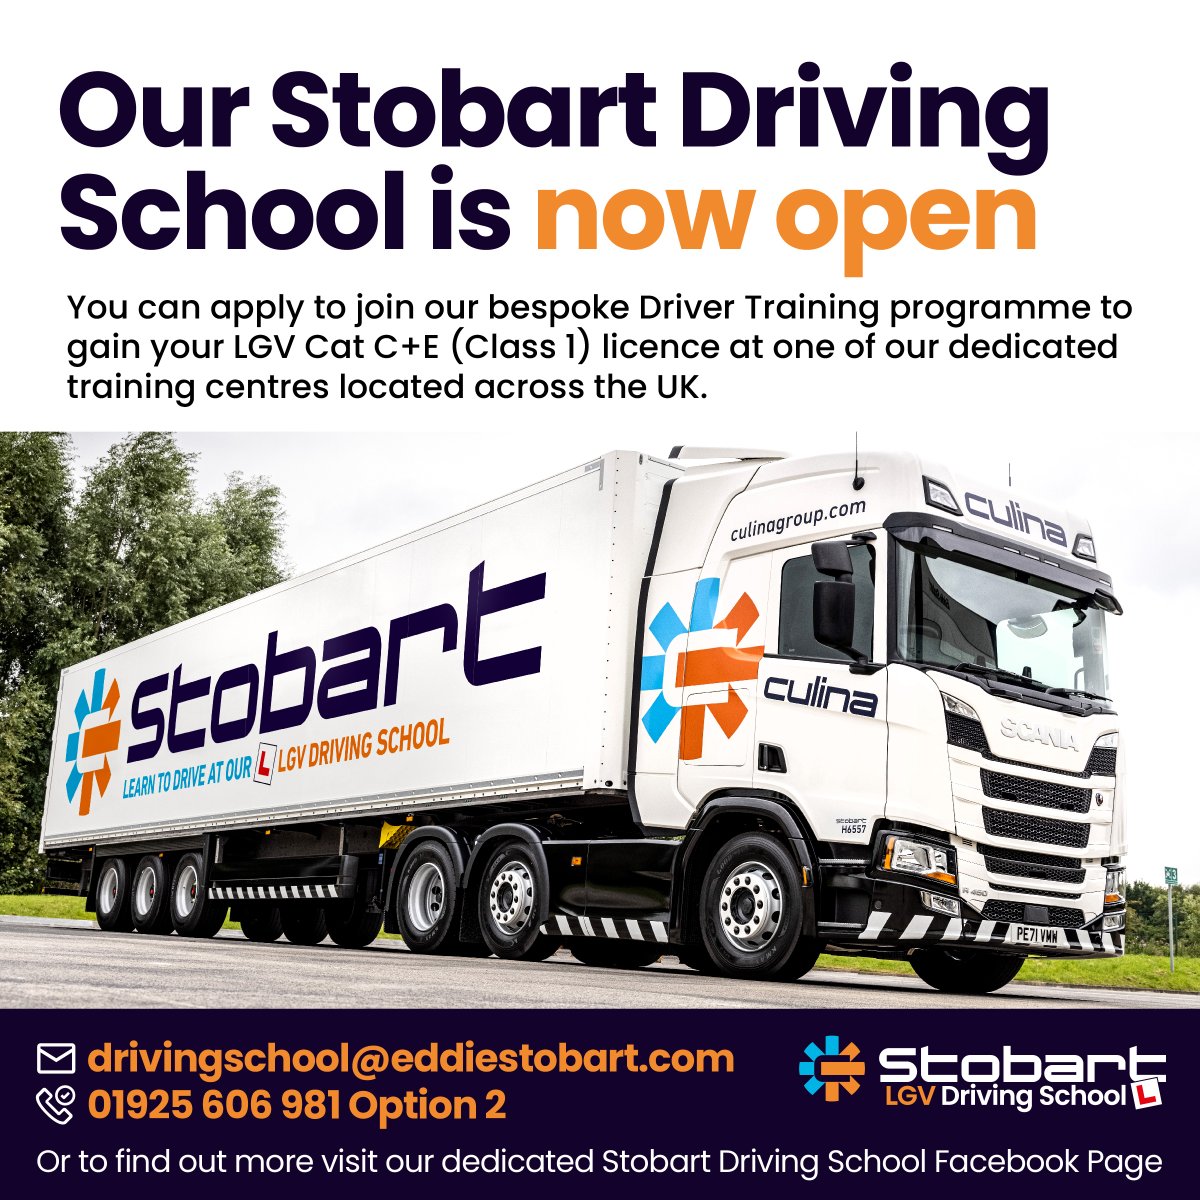 It's official! Our brand new Stobart Driving Schools are now open! If you're looking to gain your LGV licence and would like to become a Stobart Driver, you can apply to join one of our Stobart Driving Schools, located across the UK. Visit eddiestobart.co.uk/careers-and-tr… to apply. #HGV